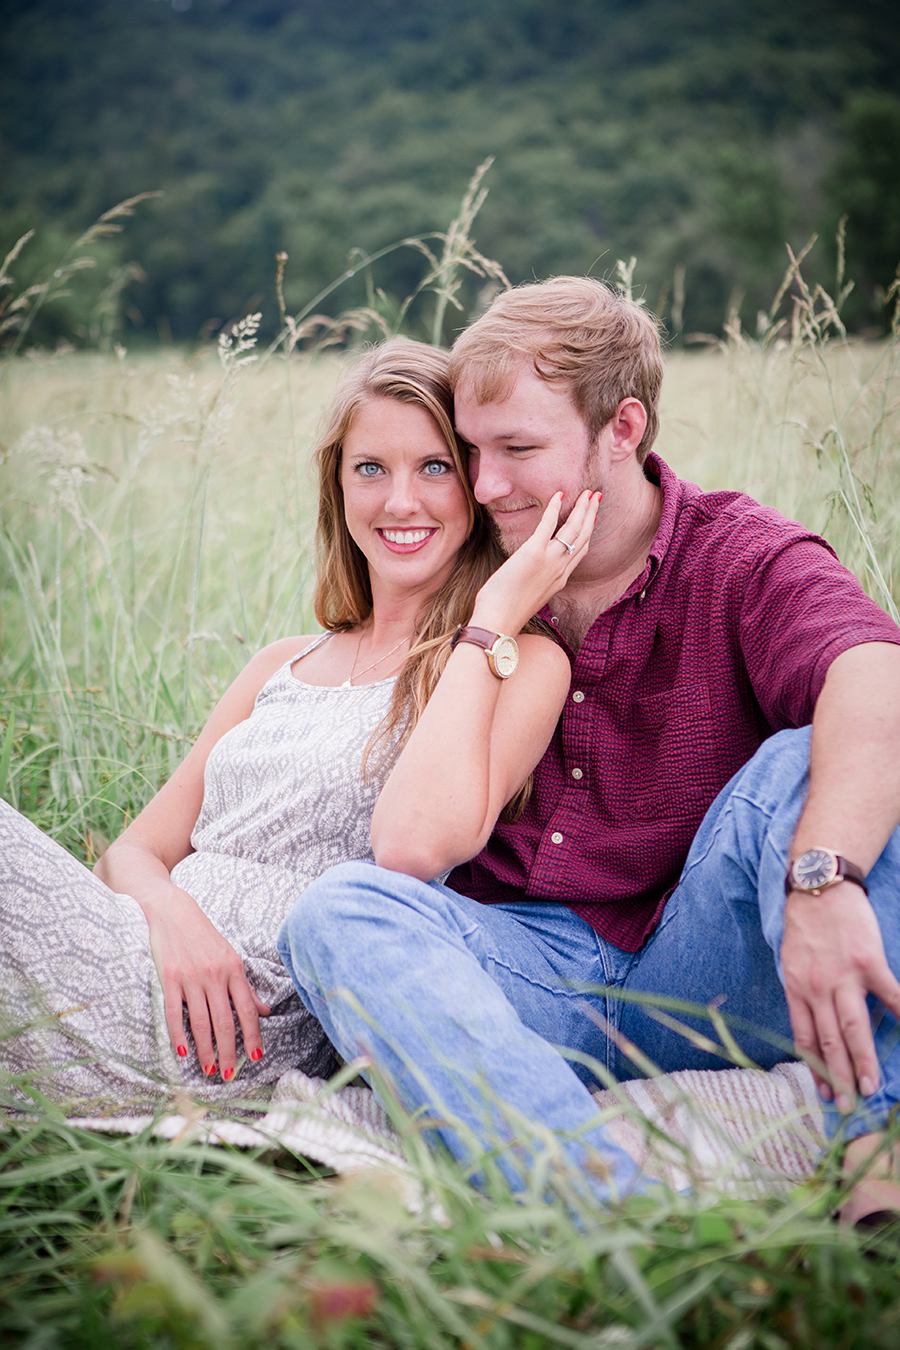 Leaning back against his chest engagement photo by Knoxville Wedding Photographer, Amanda May Photos.